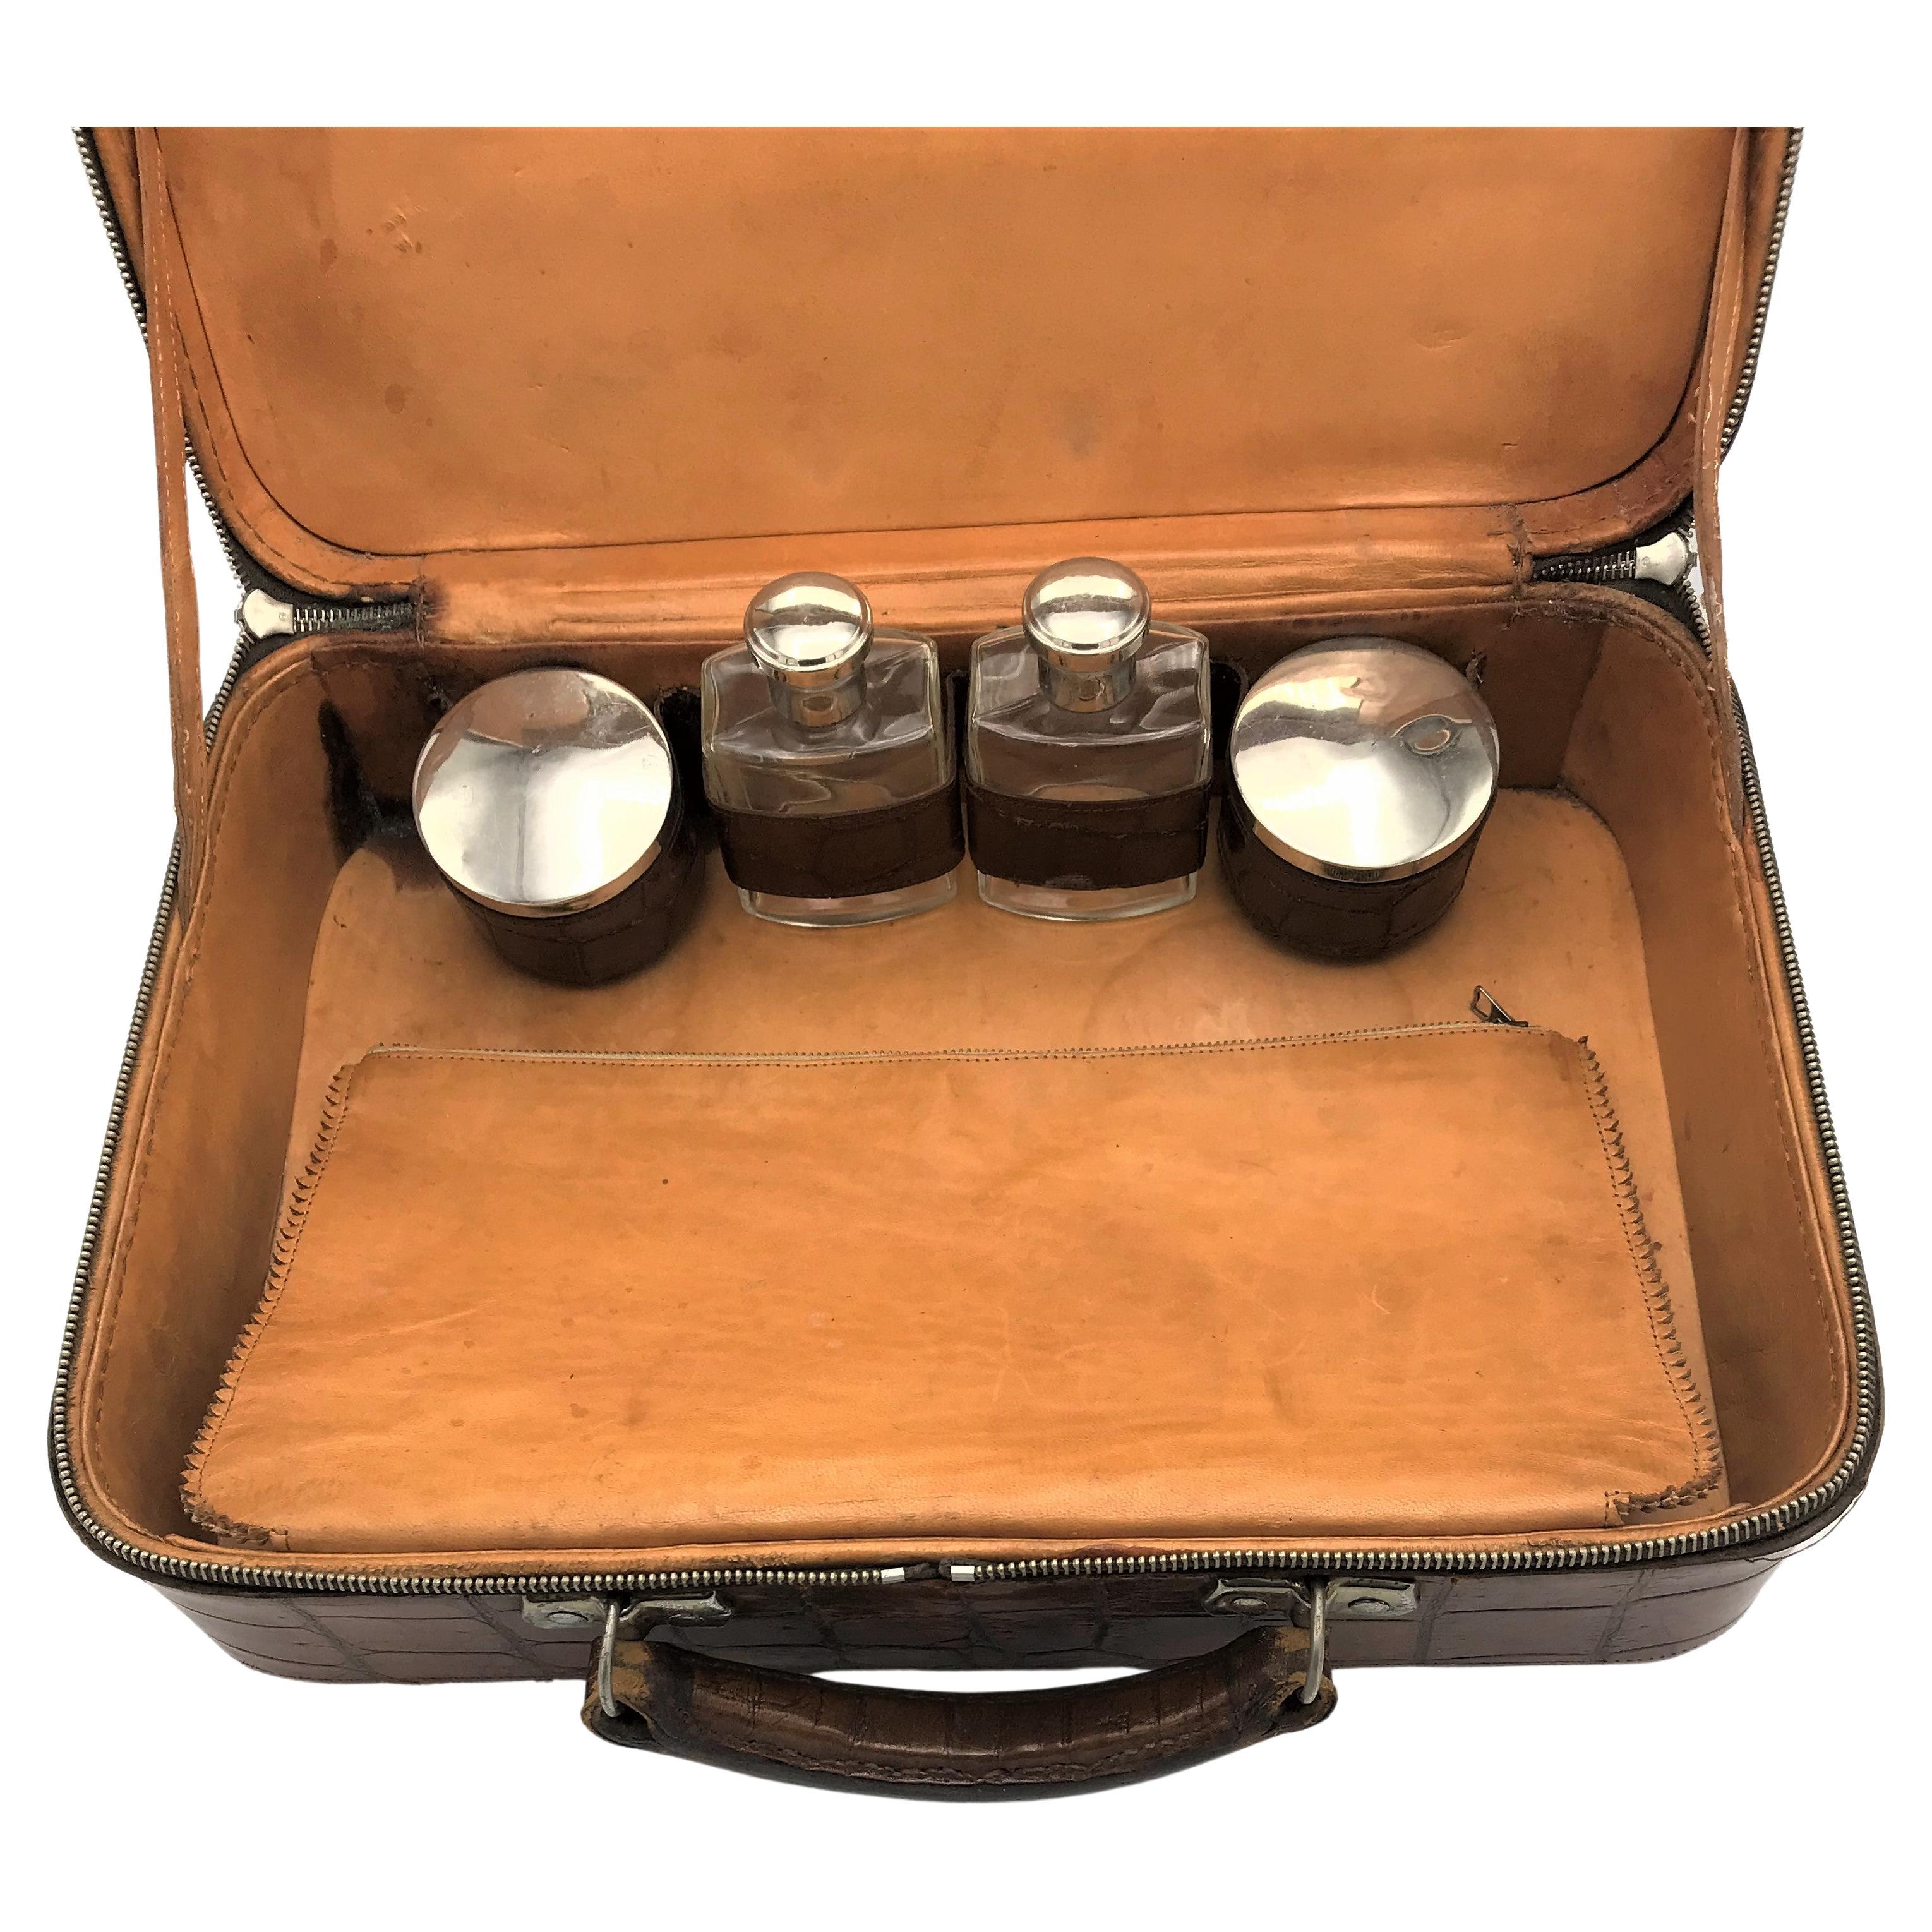 A very rare and unique beauty case made from wild crocodile from the last century. Interior made of natural leather with 2 bottles and glass jars. An integrated pocket for other utensils. A mirror was important when traveling, unfortunately it is a